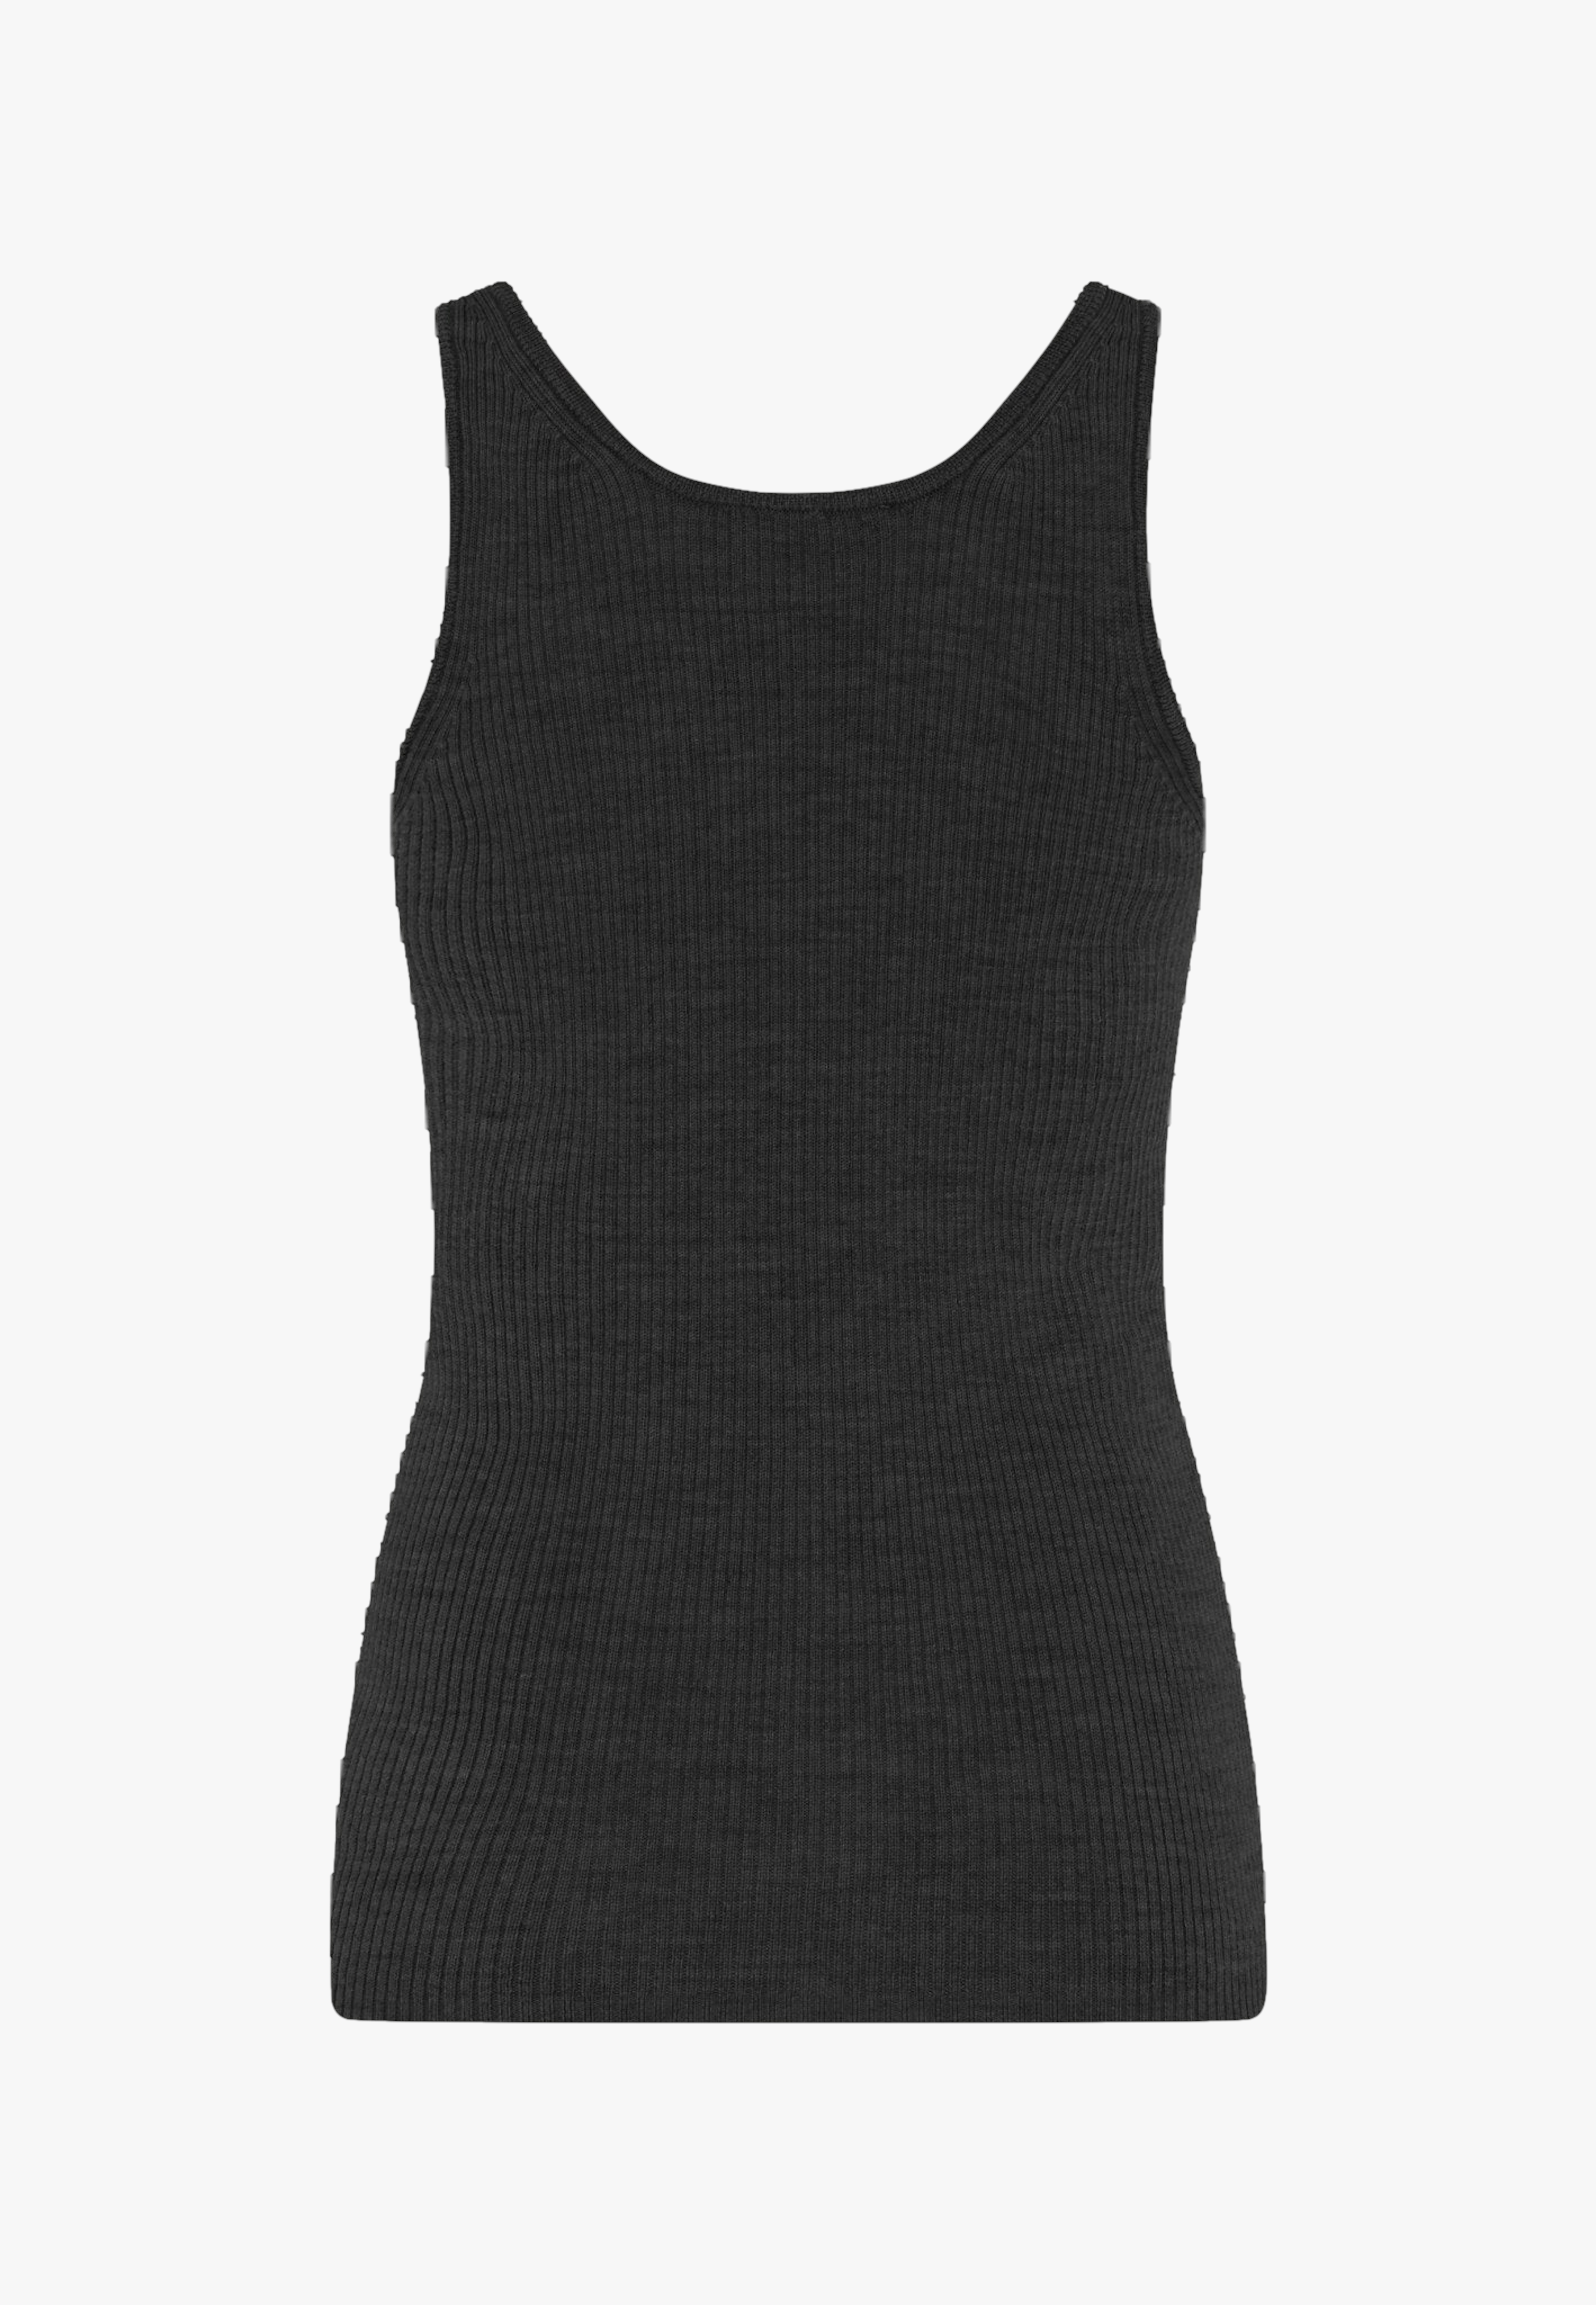 Shop Tropea Top Merino Wool - Black from HERSKIND at Seezona